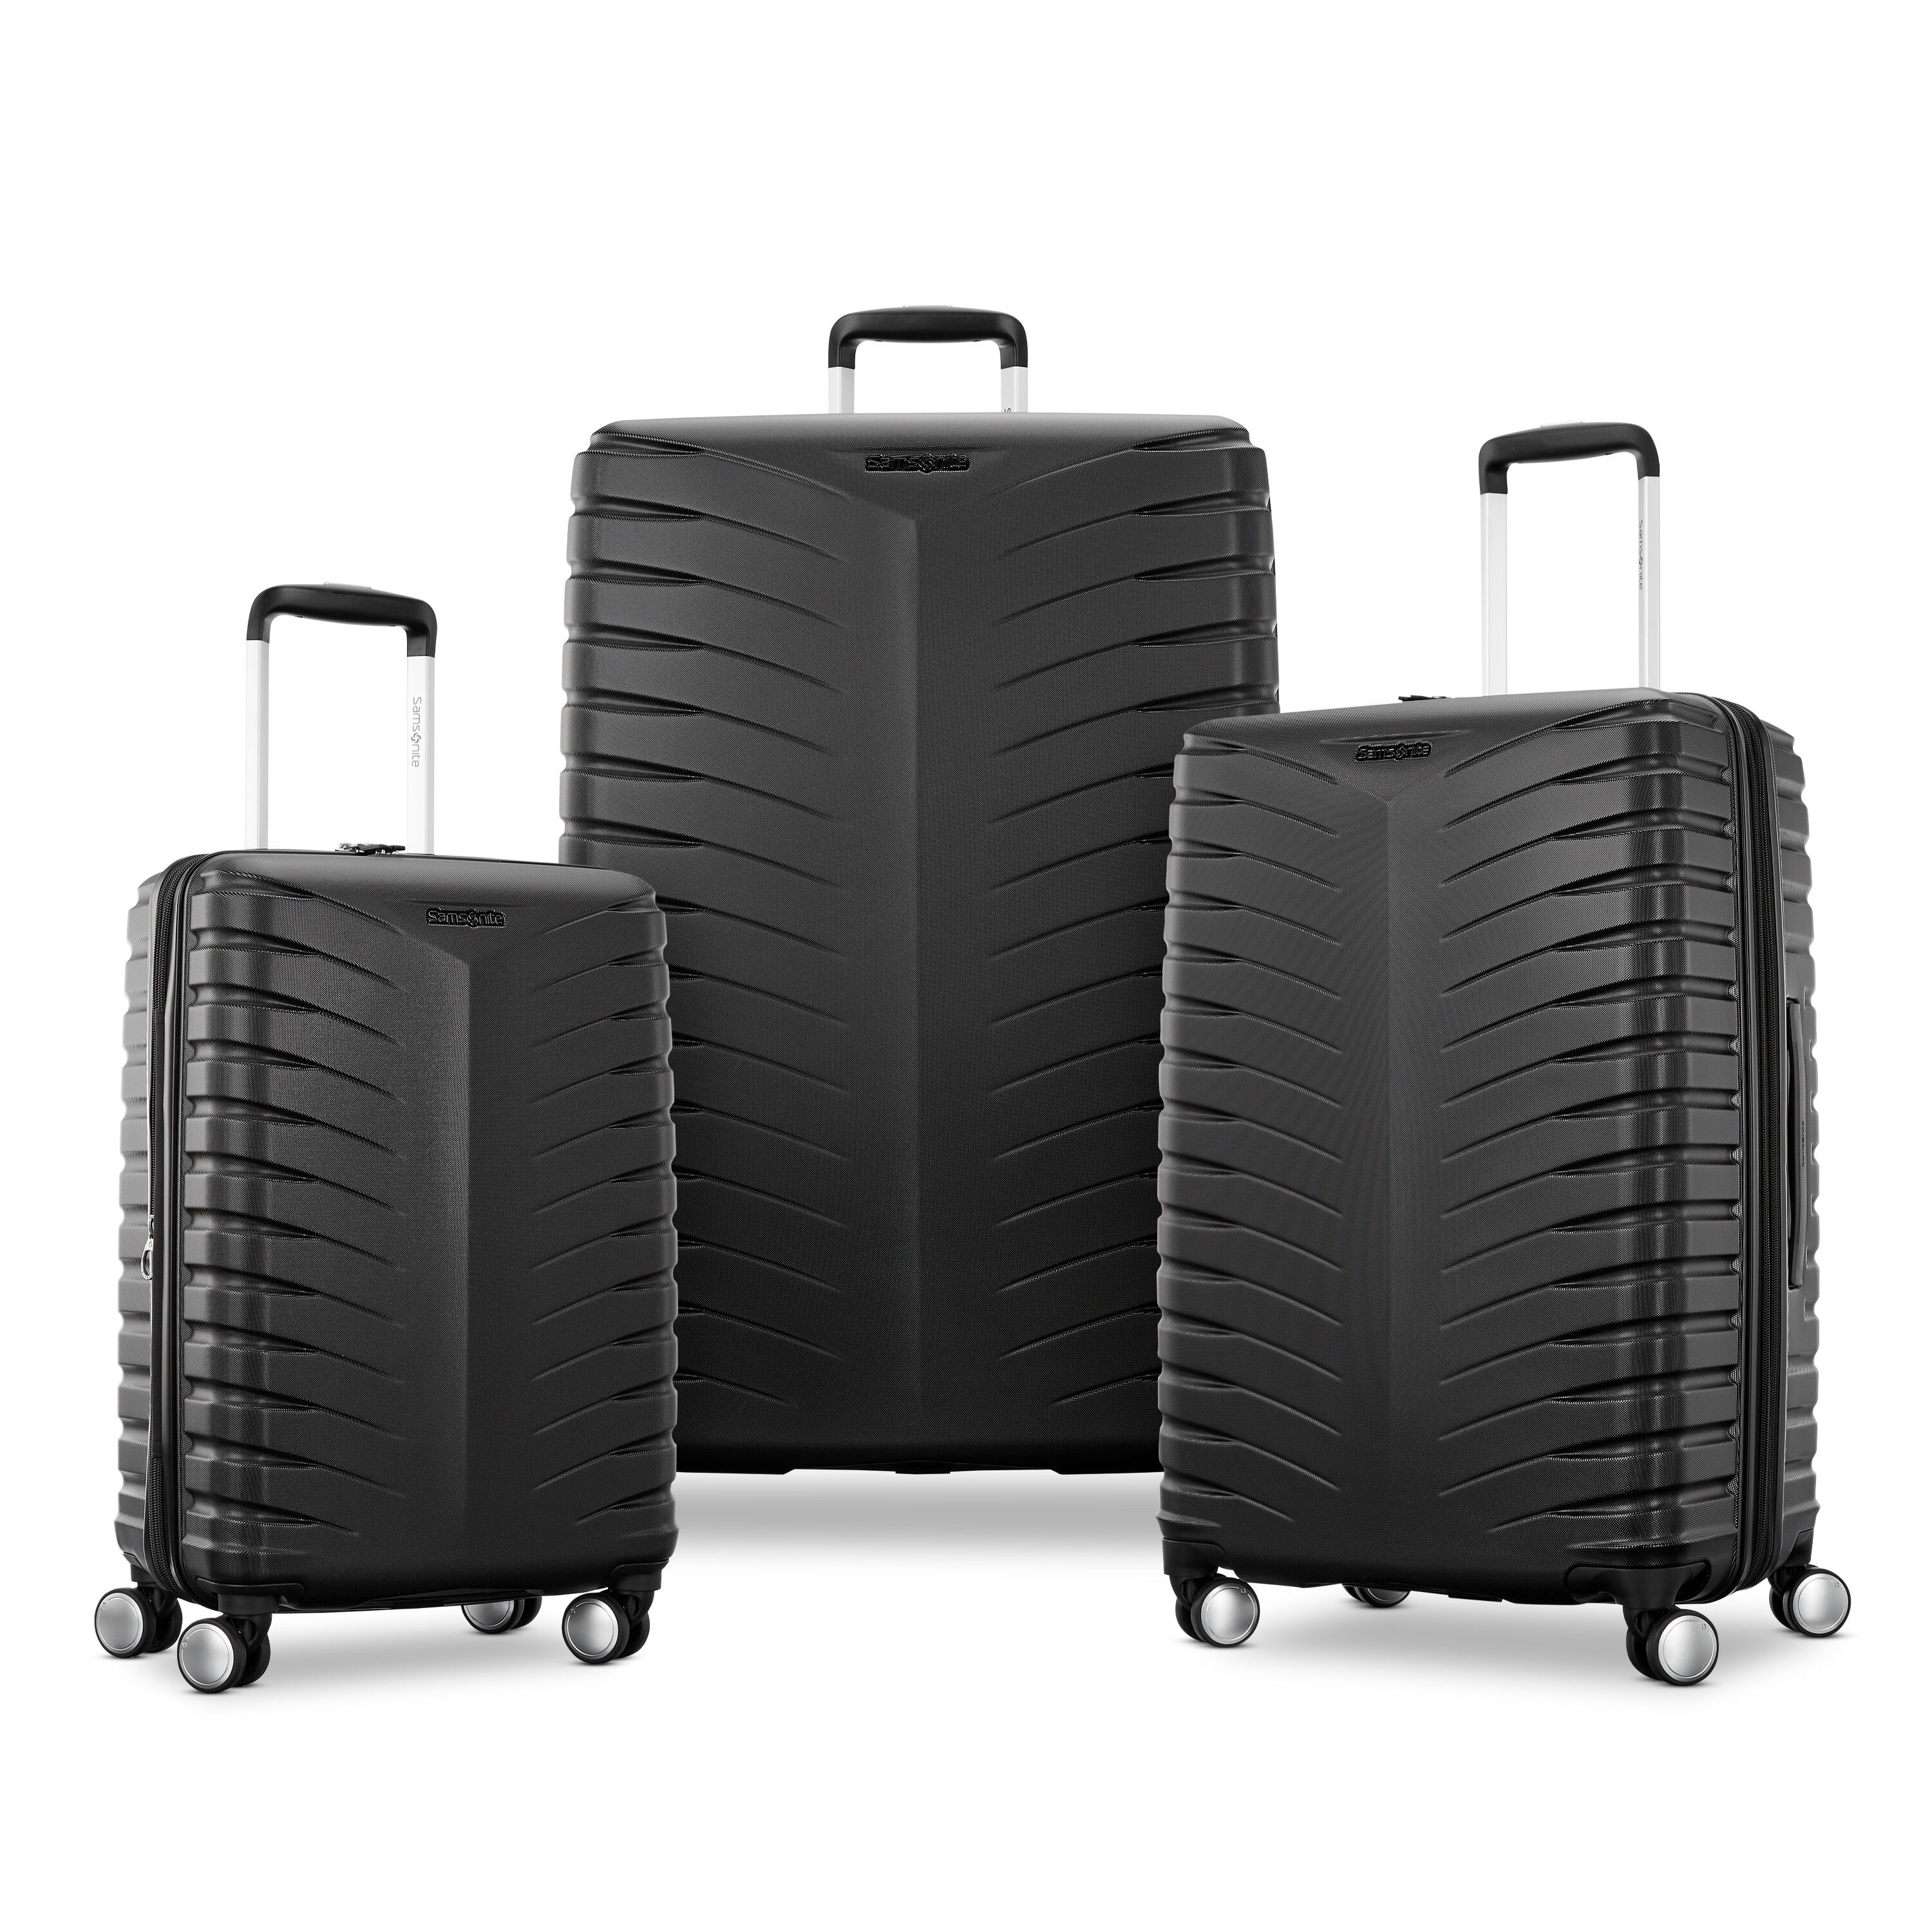 Samsonite - Durable & Innovative Luggage, Business Cases 